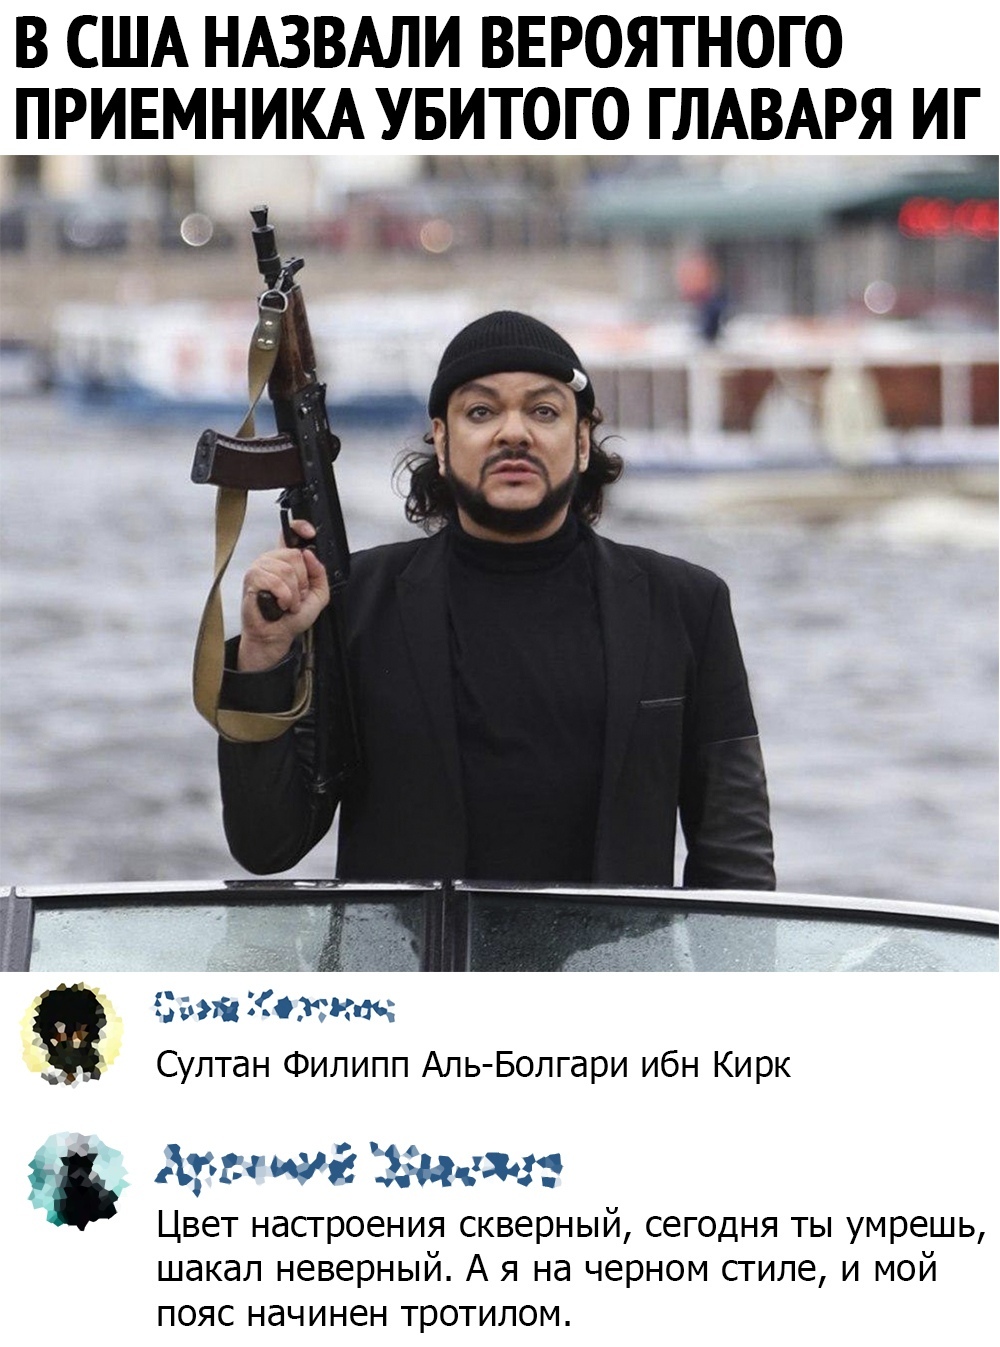 Filka is like that - Philip Kirkorov, USA, ISIS, Picture with text